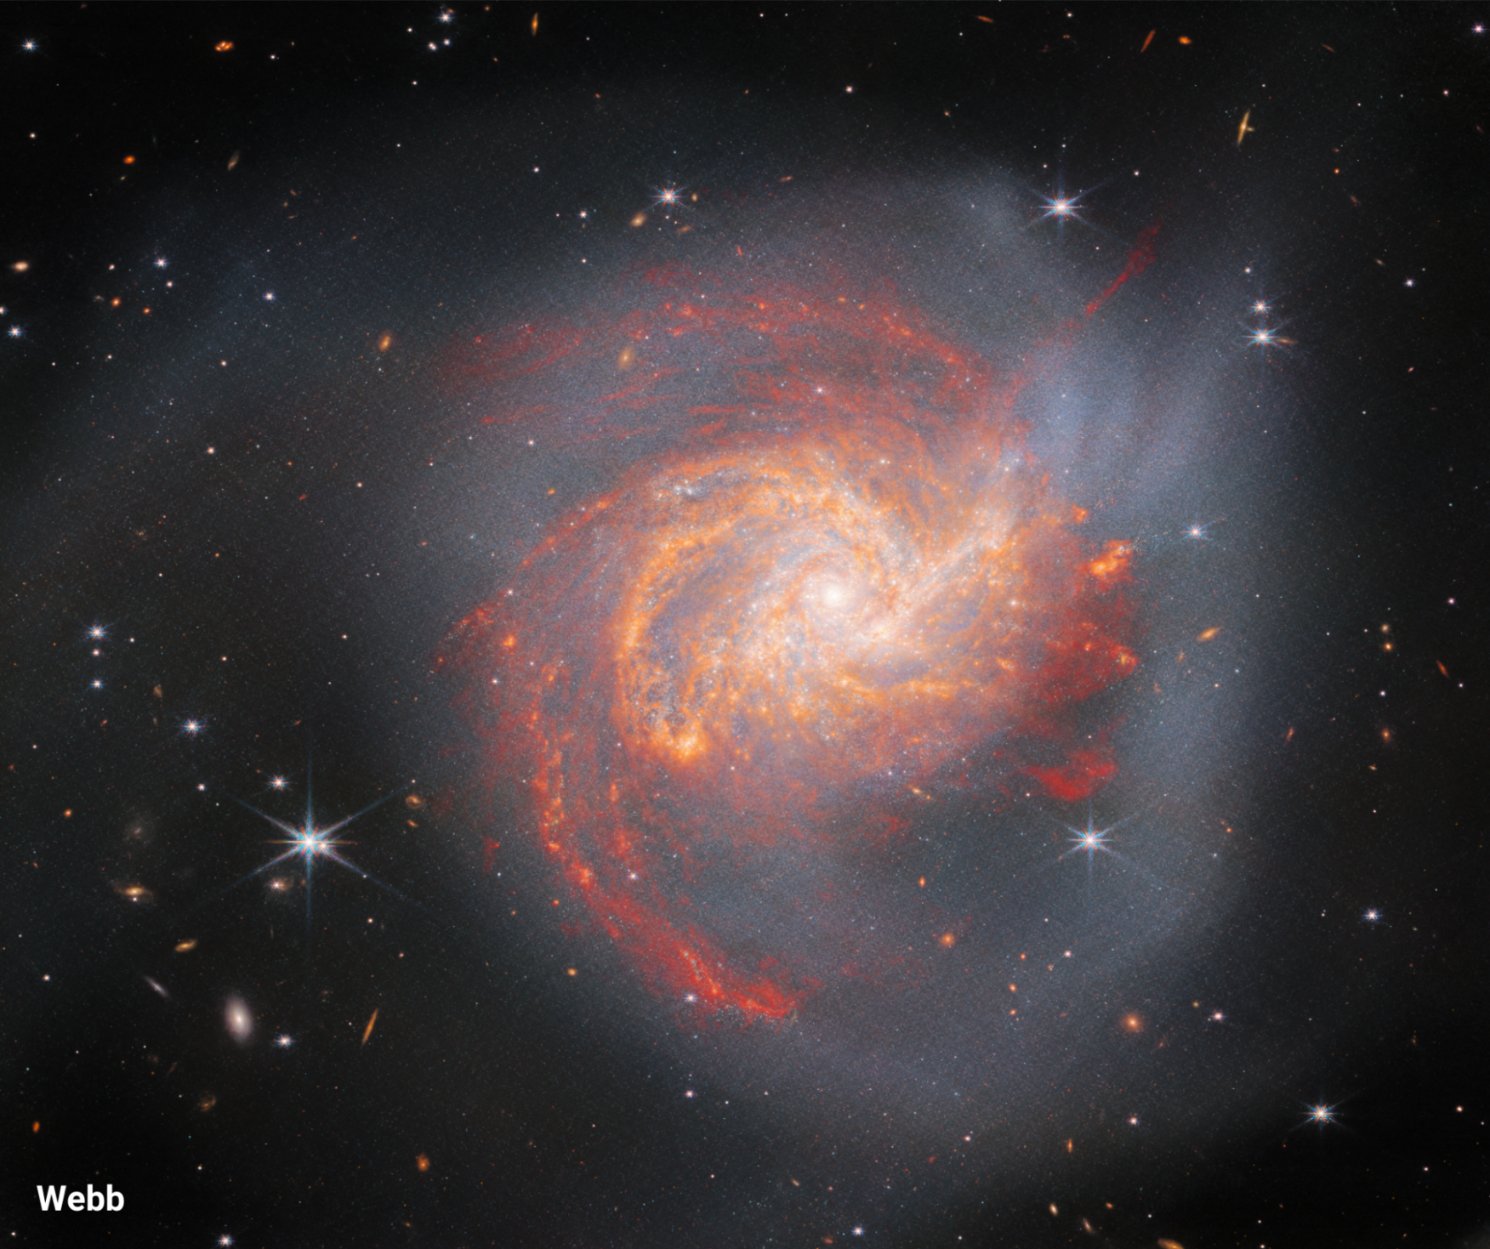 500 million years ago, 2 massive spiral galaxies collided. Their clouds of gas & dust mingled like smoke, sparking a burst of star formation. This event created galaxy NGC 3256. Its baby stars shine in infrared light, Webb’s specialty.